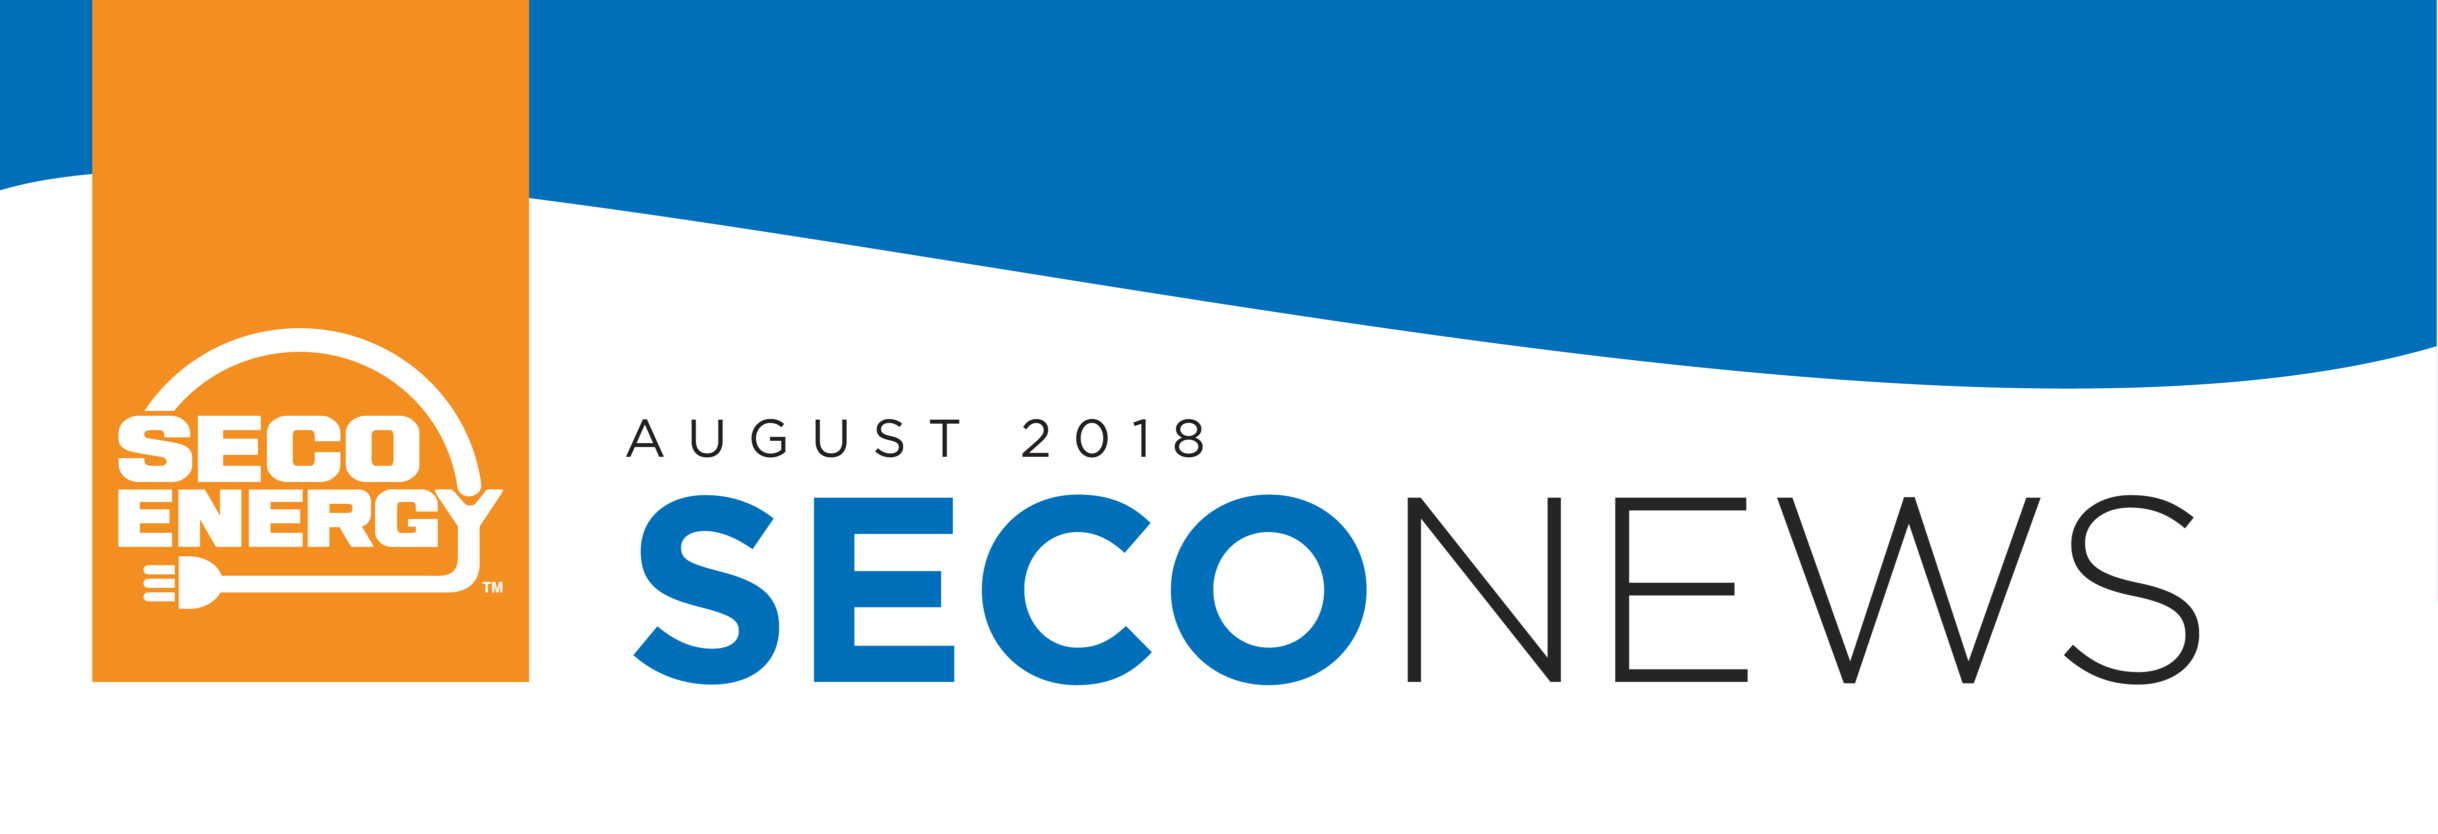 SECO News, August 2018